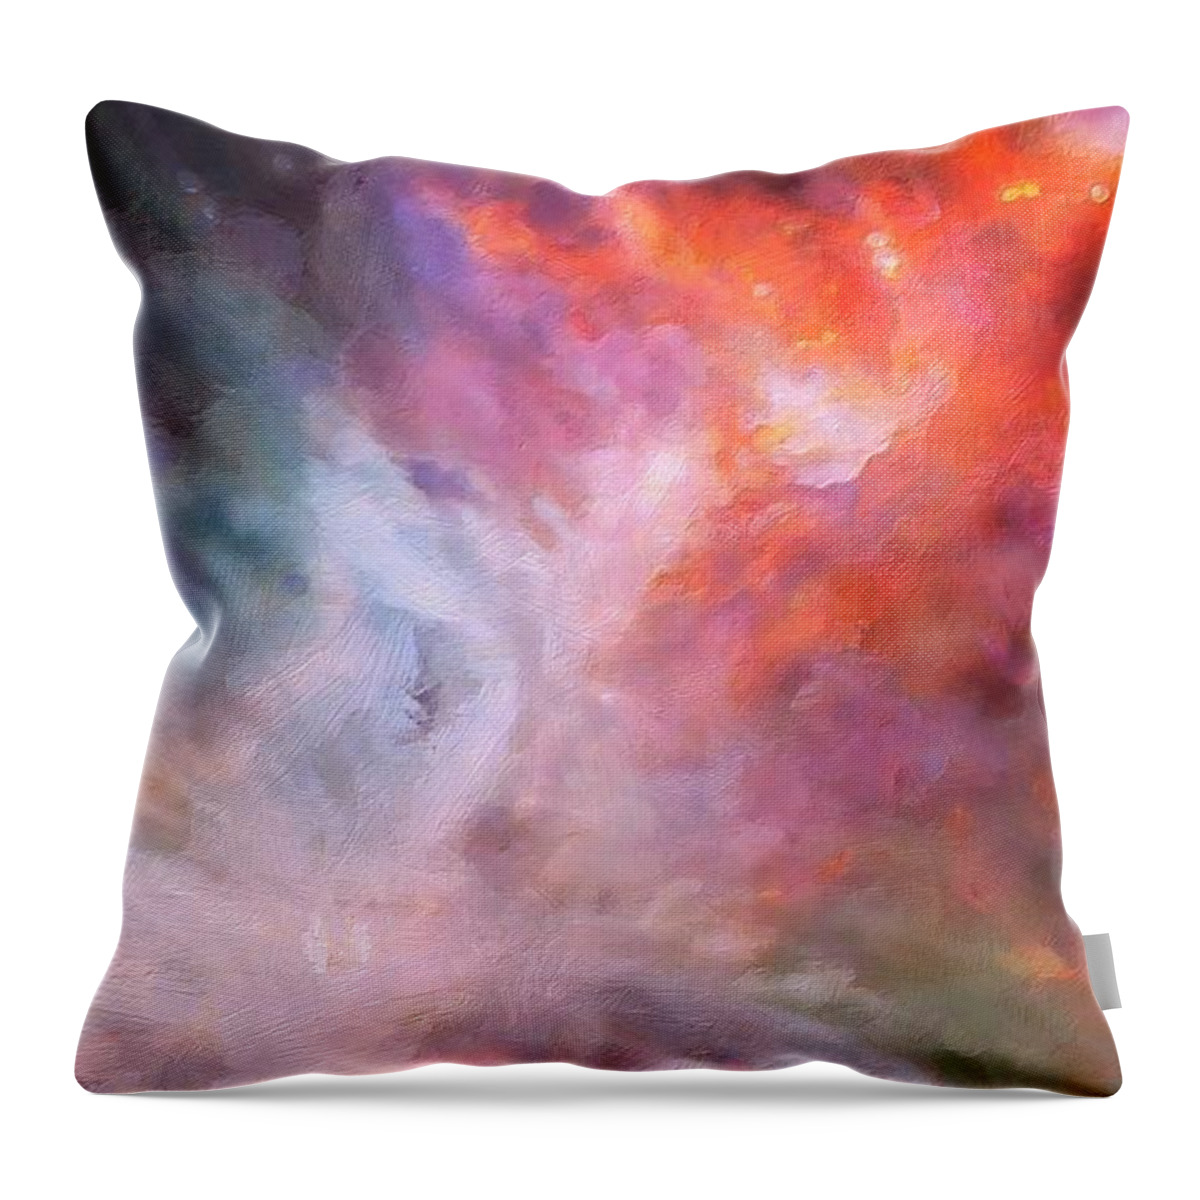 Night Throw Pillow featuring the painting Night Sky by Lelia DeMello